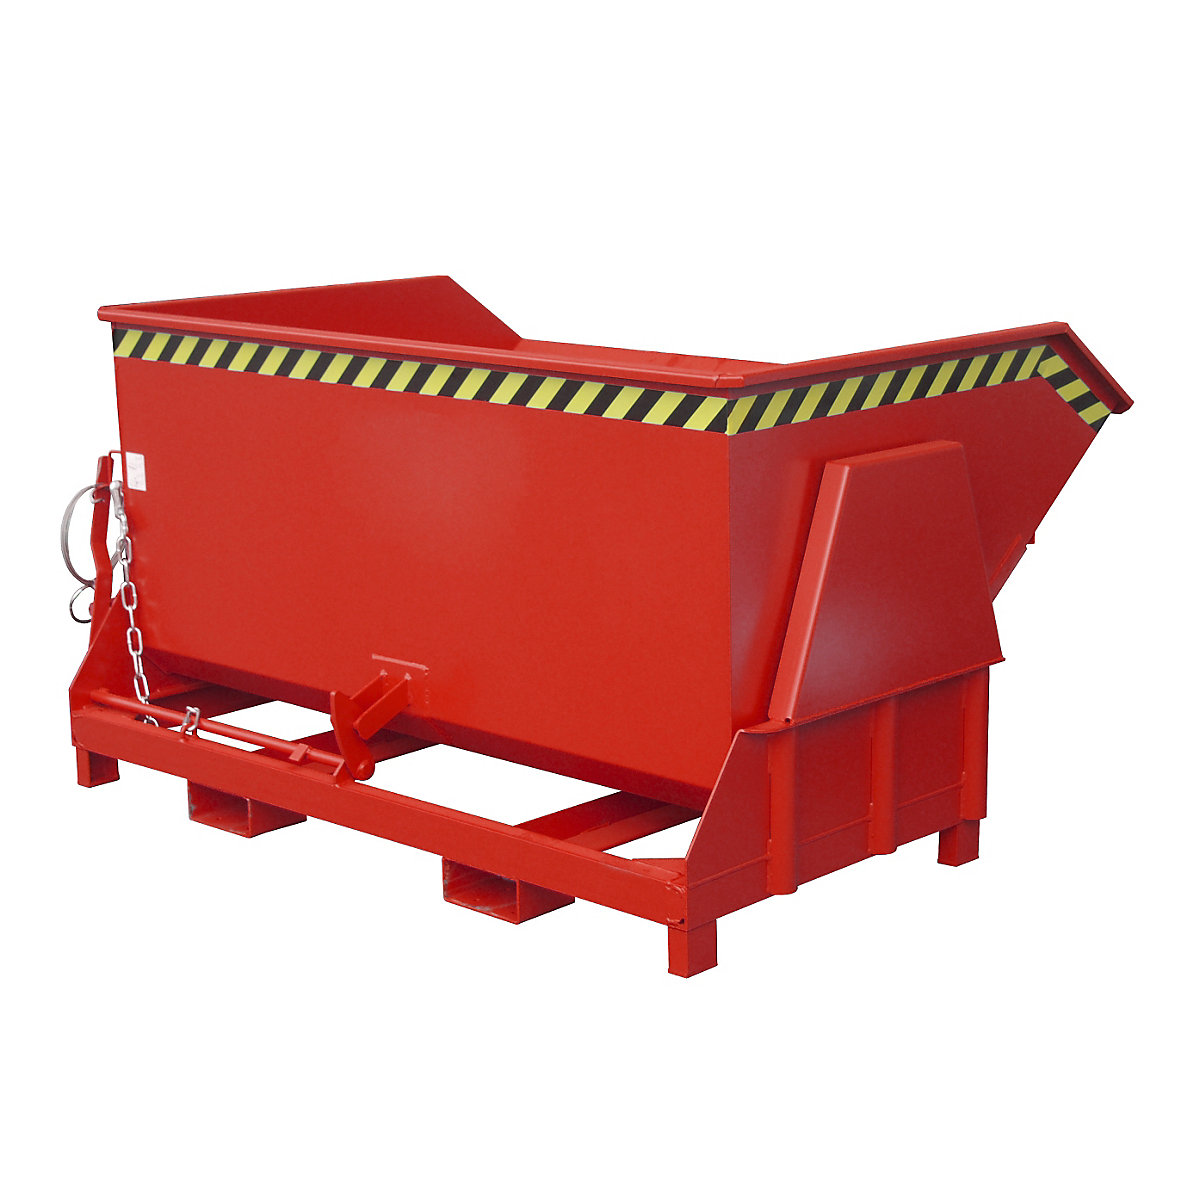 Tilting skip, standard overall height, without wheels – eurokraft pro, capacity 1.5 m³, painted red RAL 3000-11